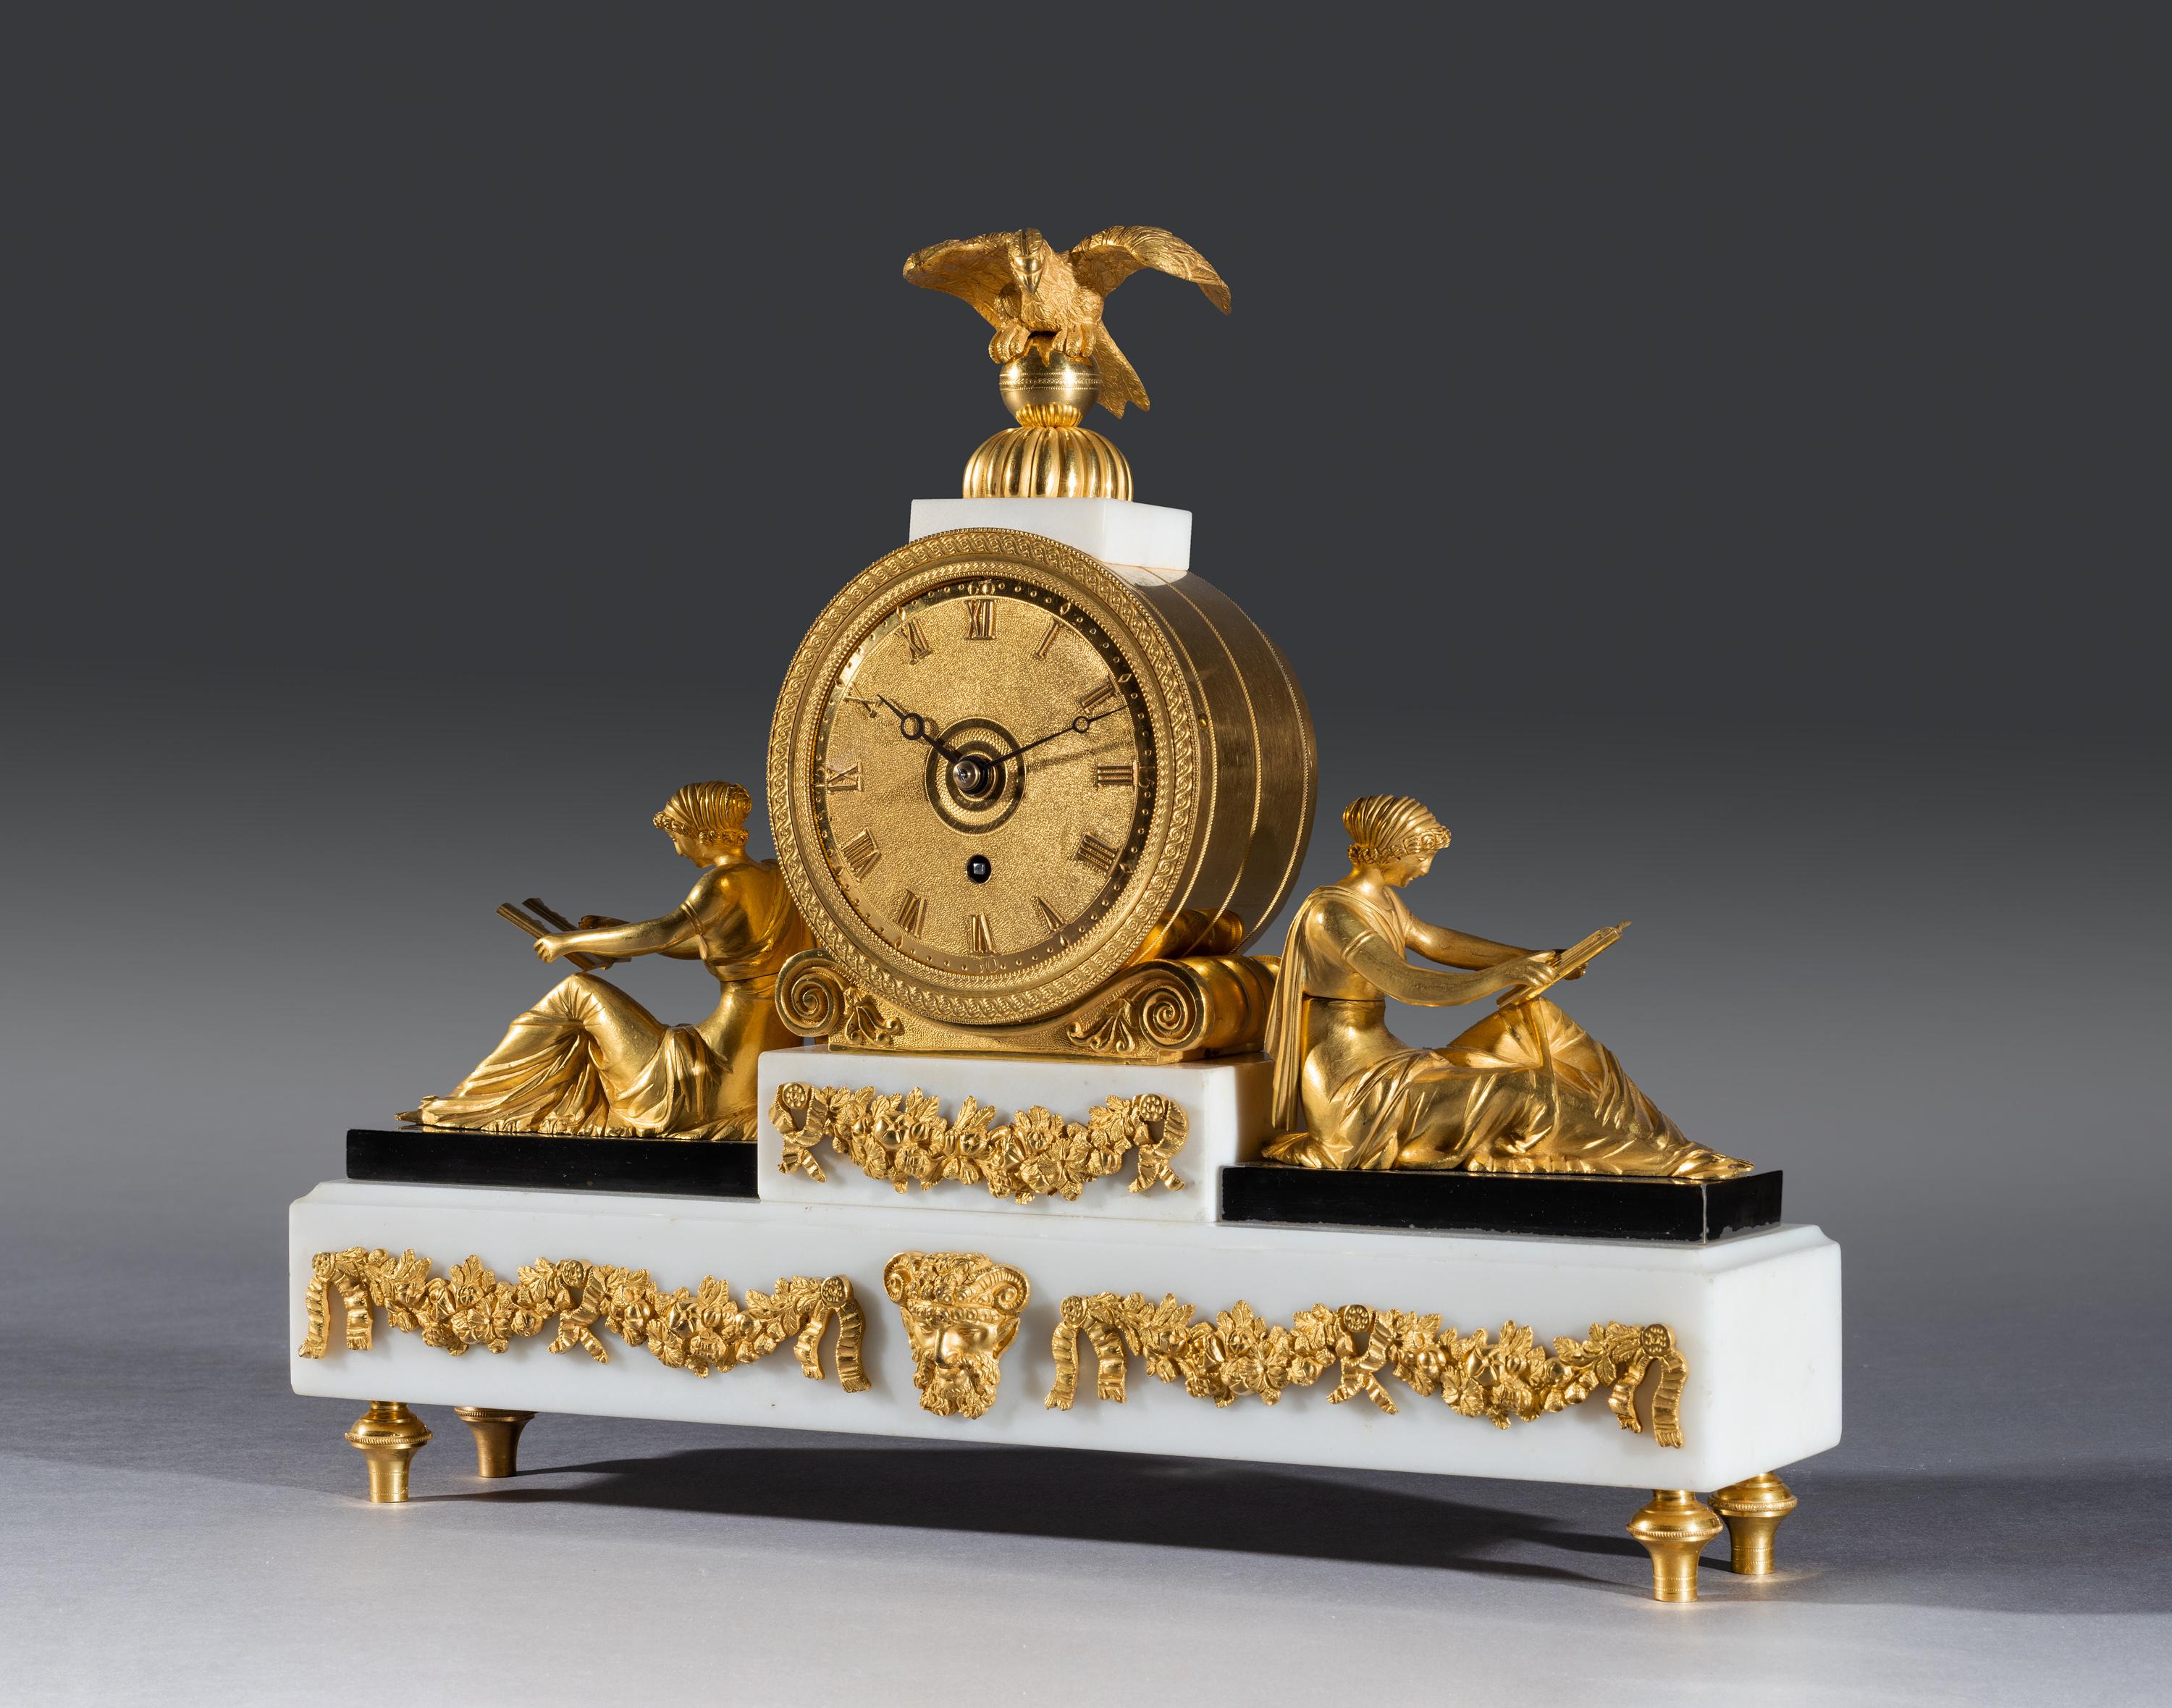 Regency Period White Marble and Gilt Bronze Mantel Timepiece the Superb English In Good Condition For Sale In Bradford on Avon, GB